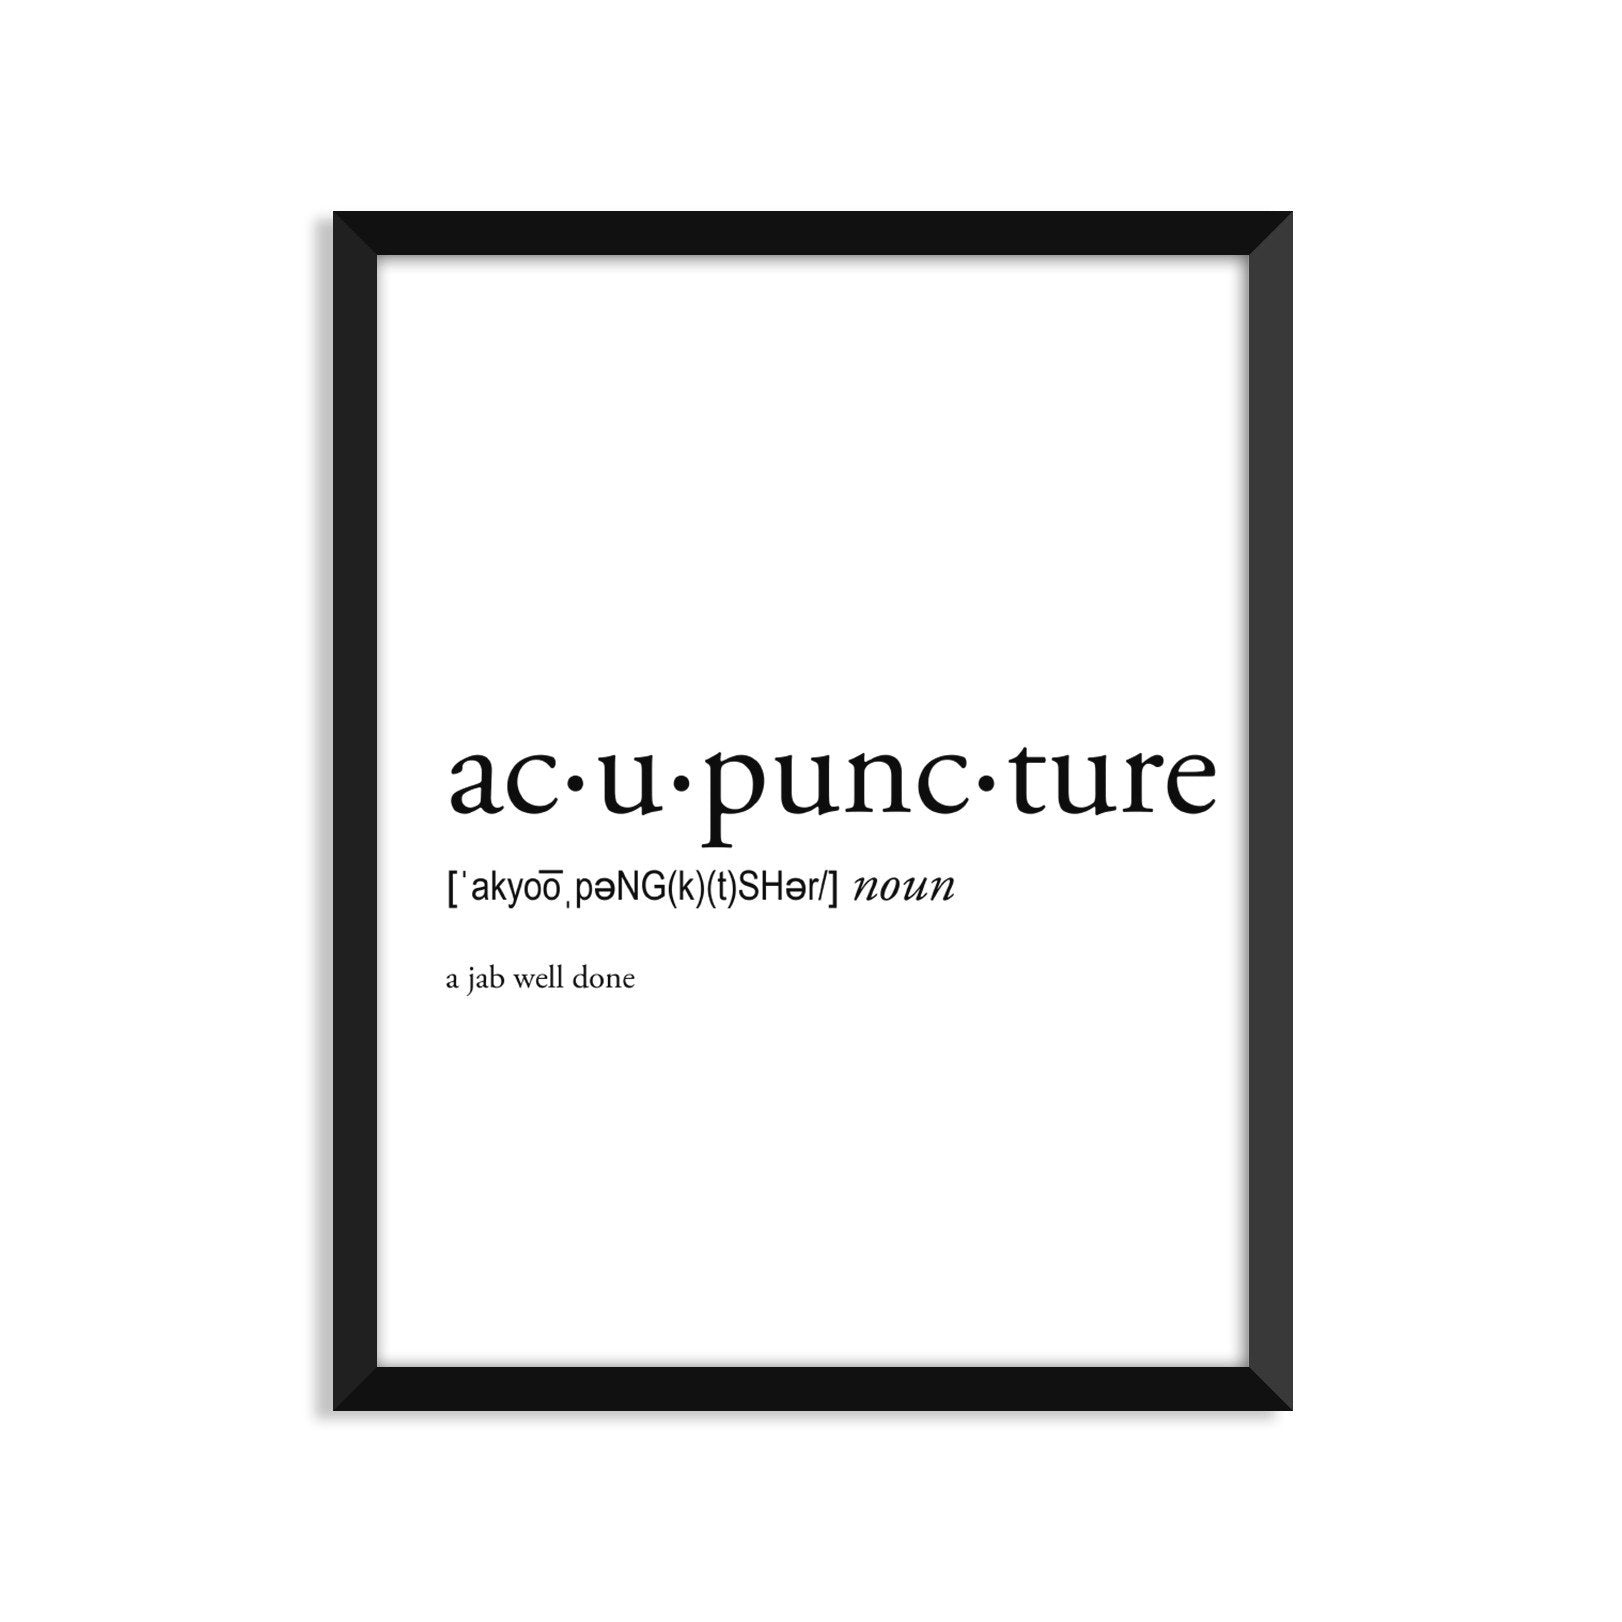 acupuncture noun greeting card